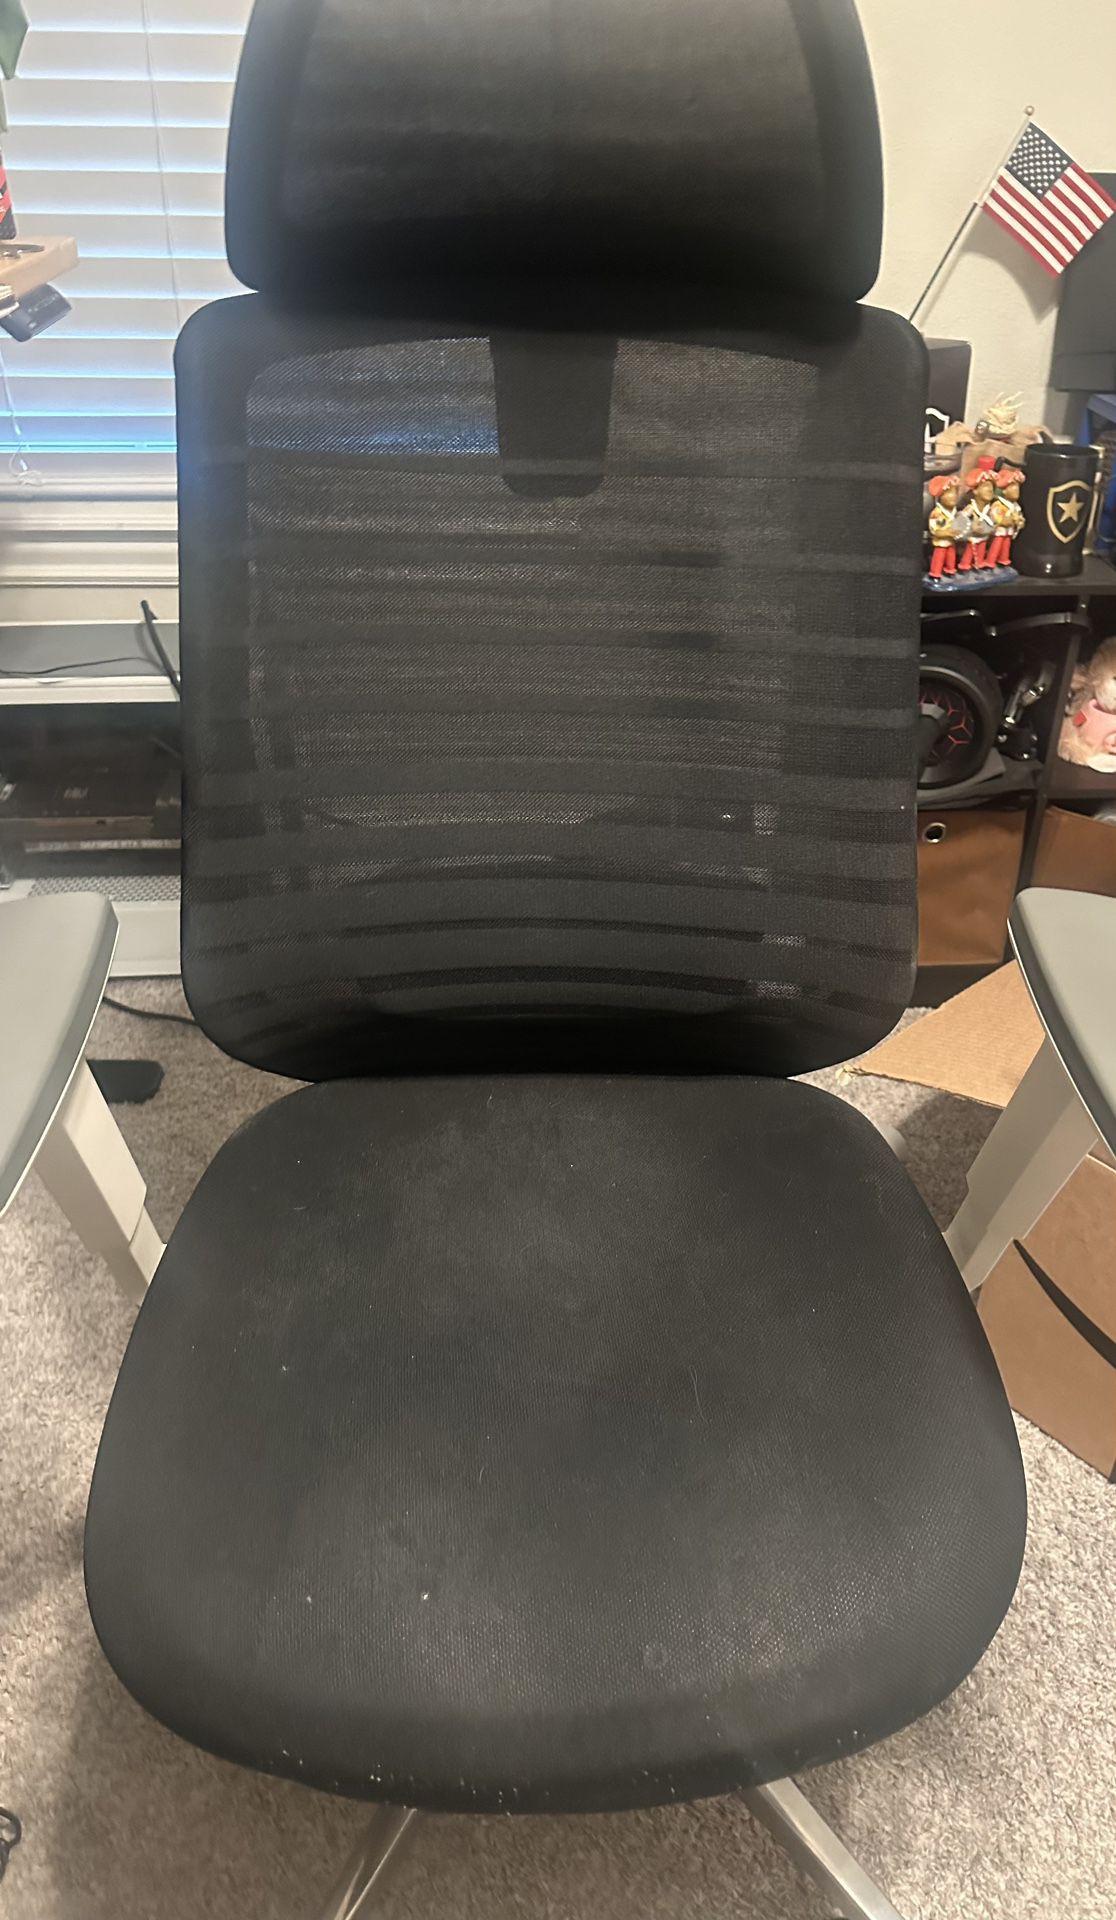 Gaming Computer Chair 